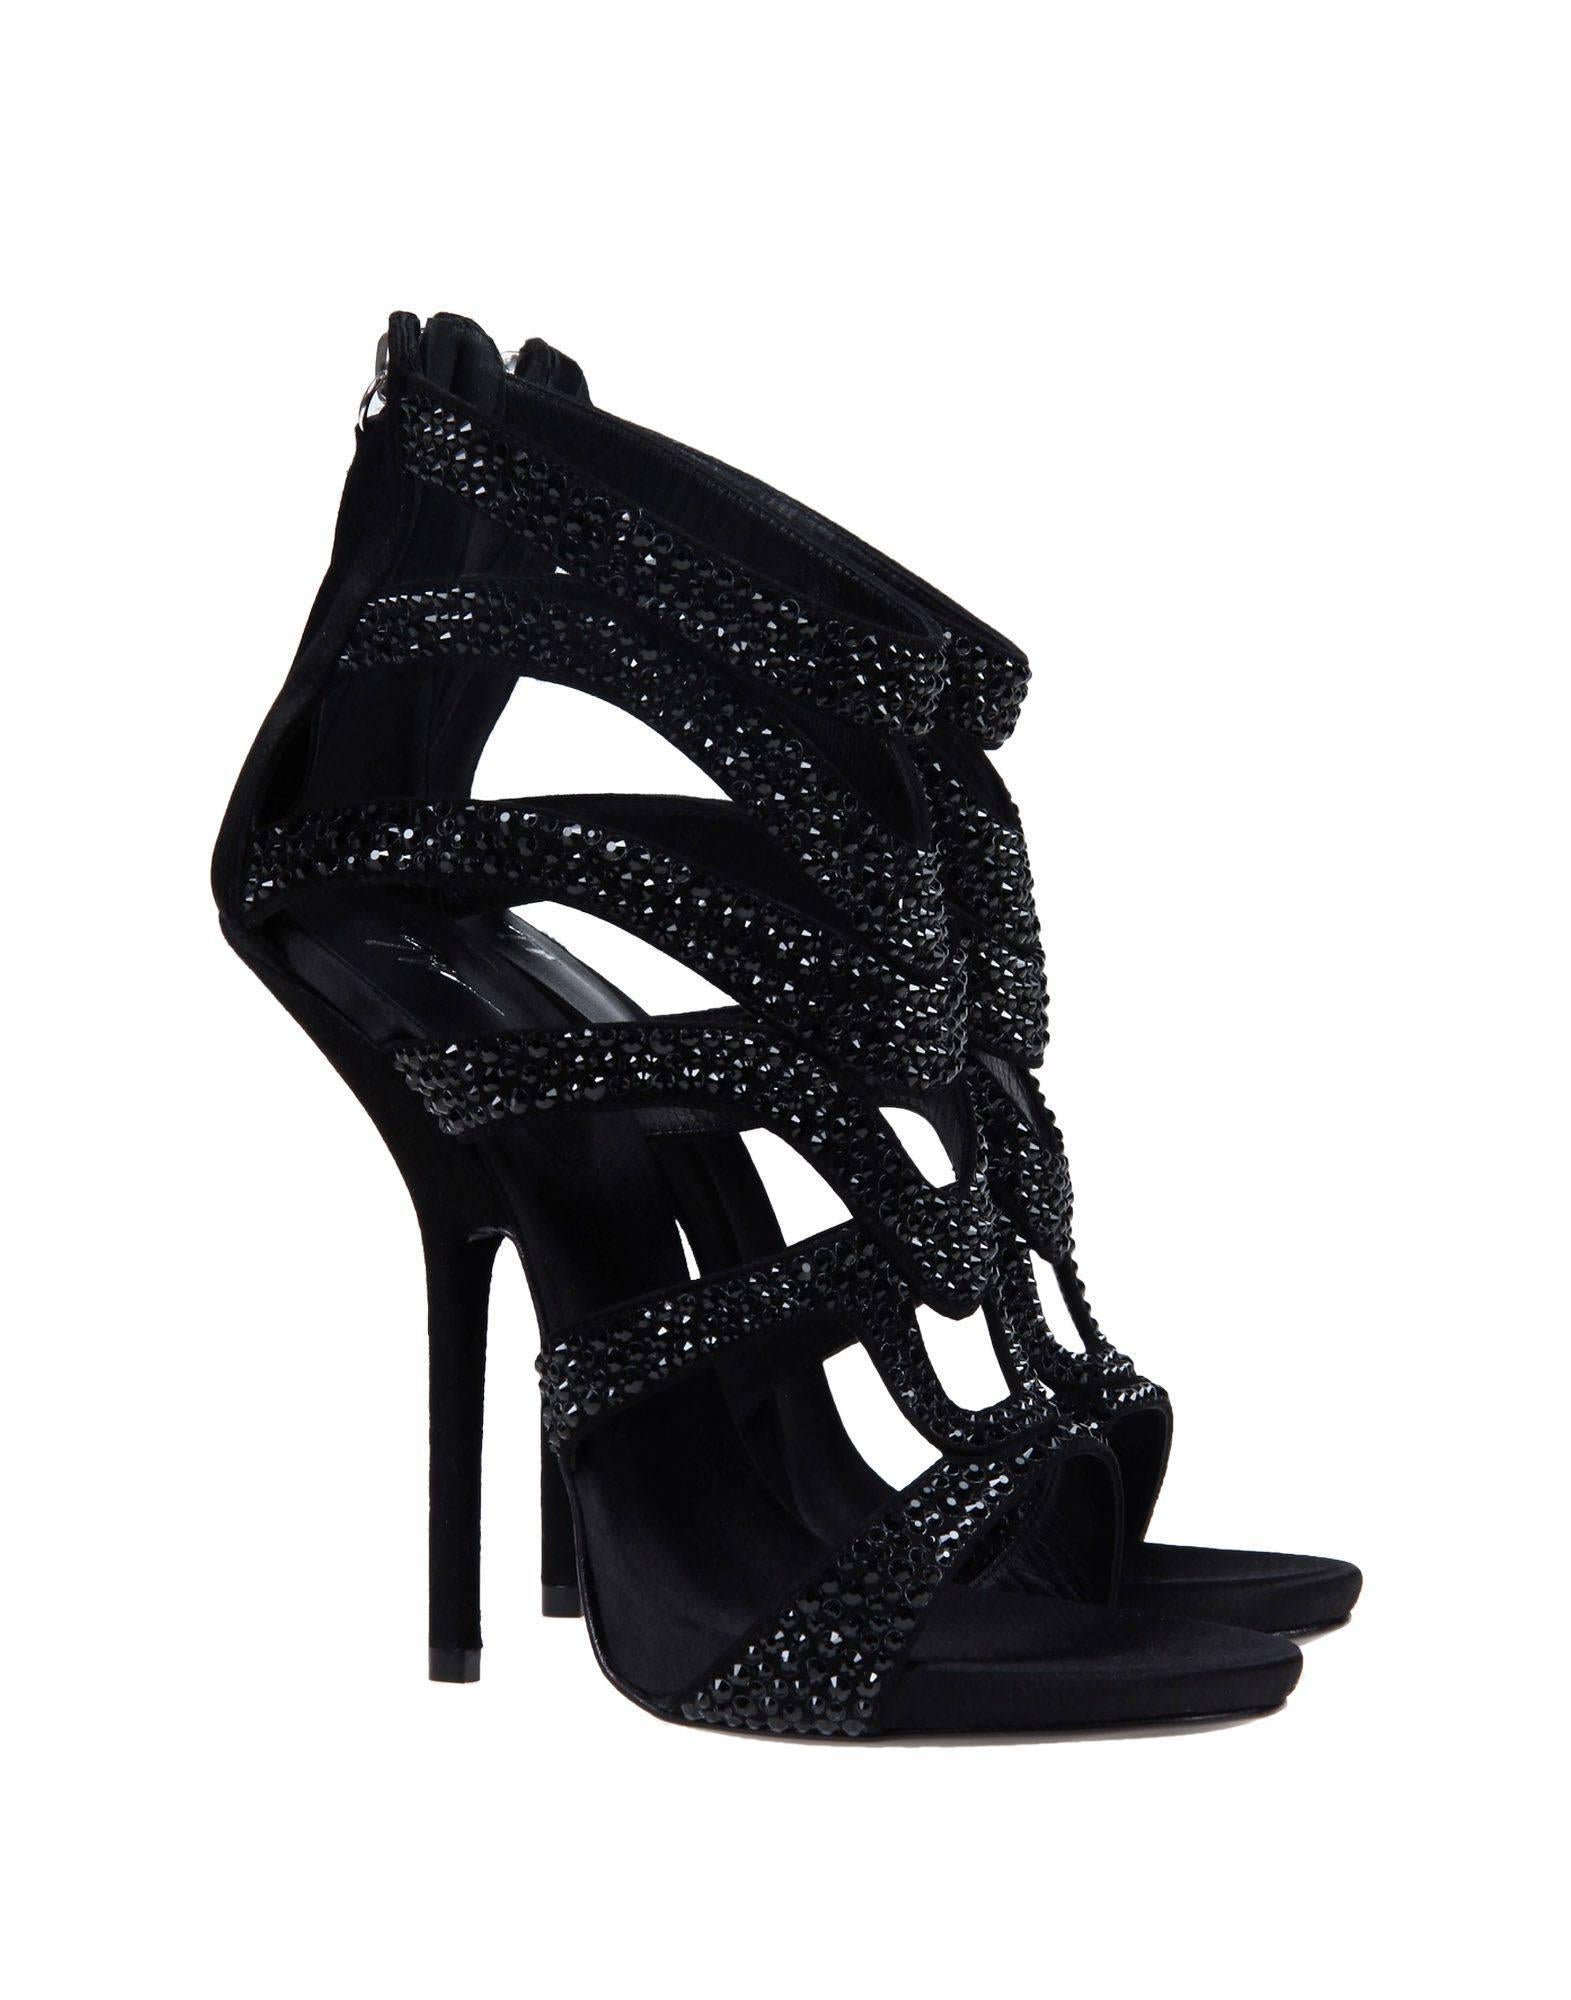 Giuseppe Zanotti New Sold Out Black Suede Rhinestone Evening Heels in Box

Size IT 36 - Our only pair!
Leather
Rhinestone
Zipper back closure
Made in Italy
Heel height 5"
Includes original Giuseppe Zanotti box 